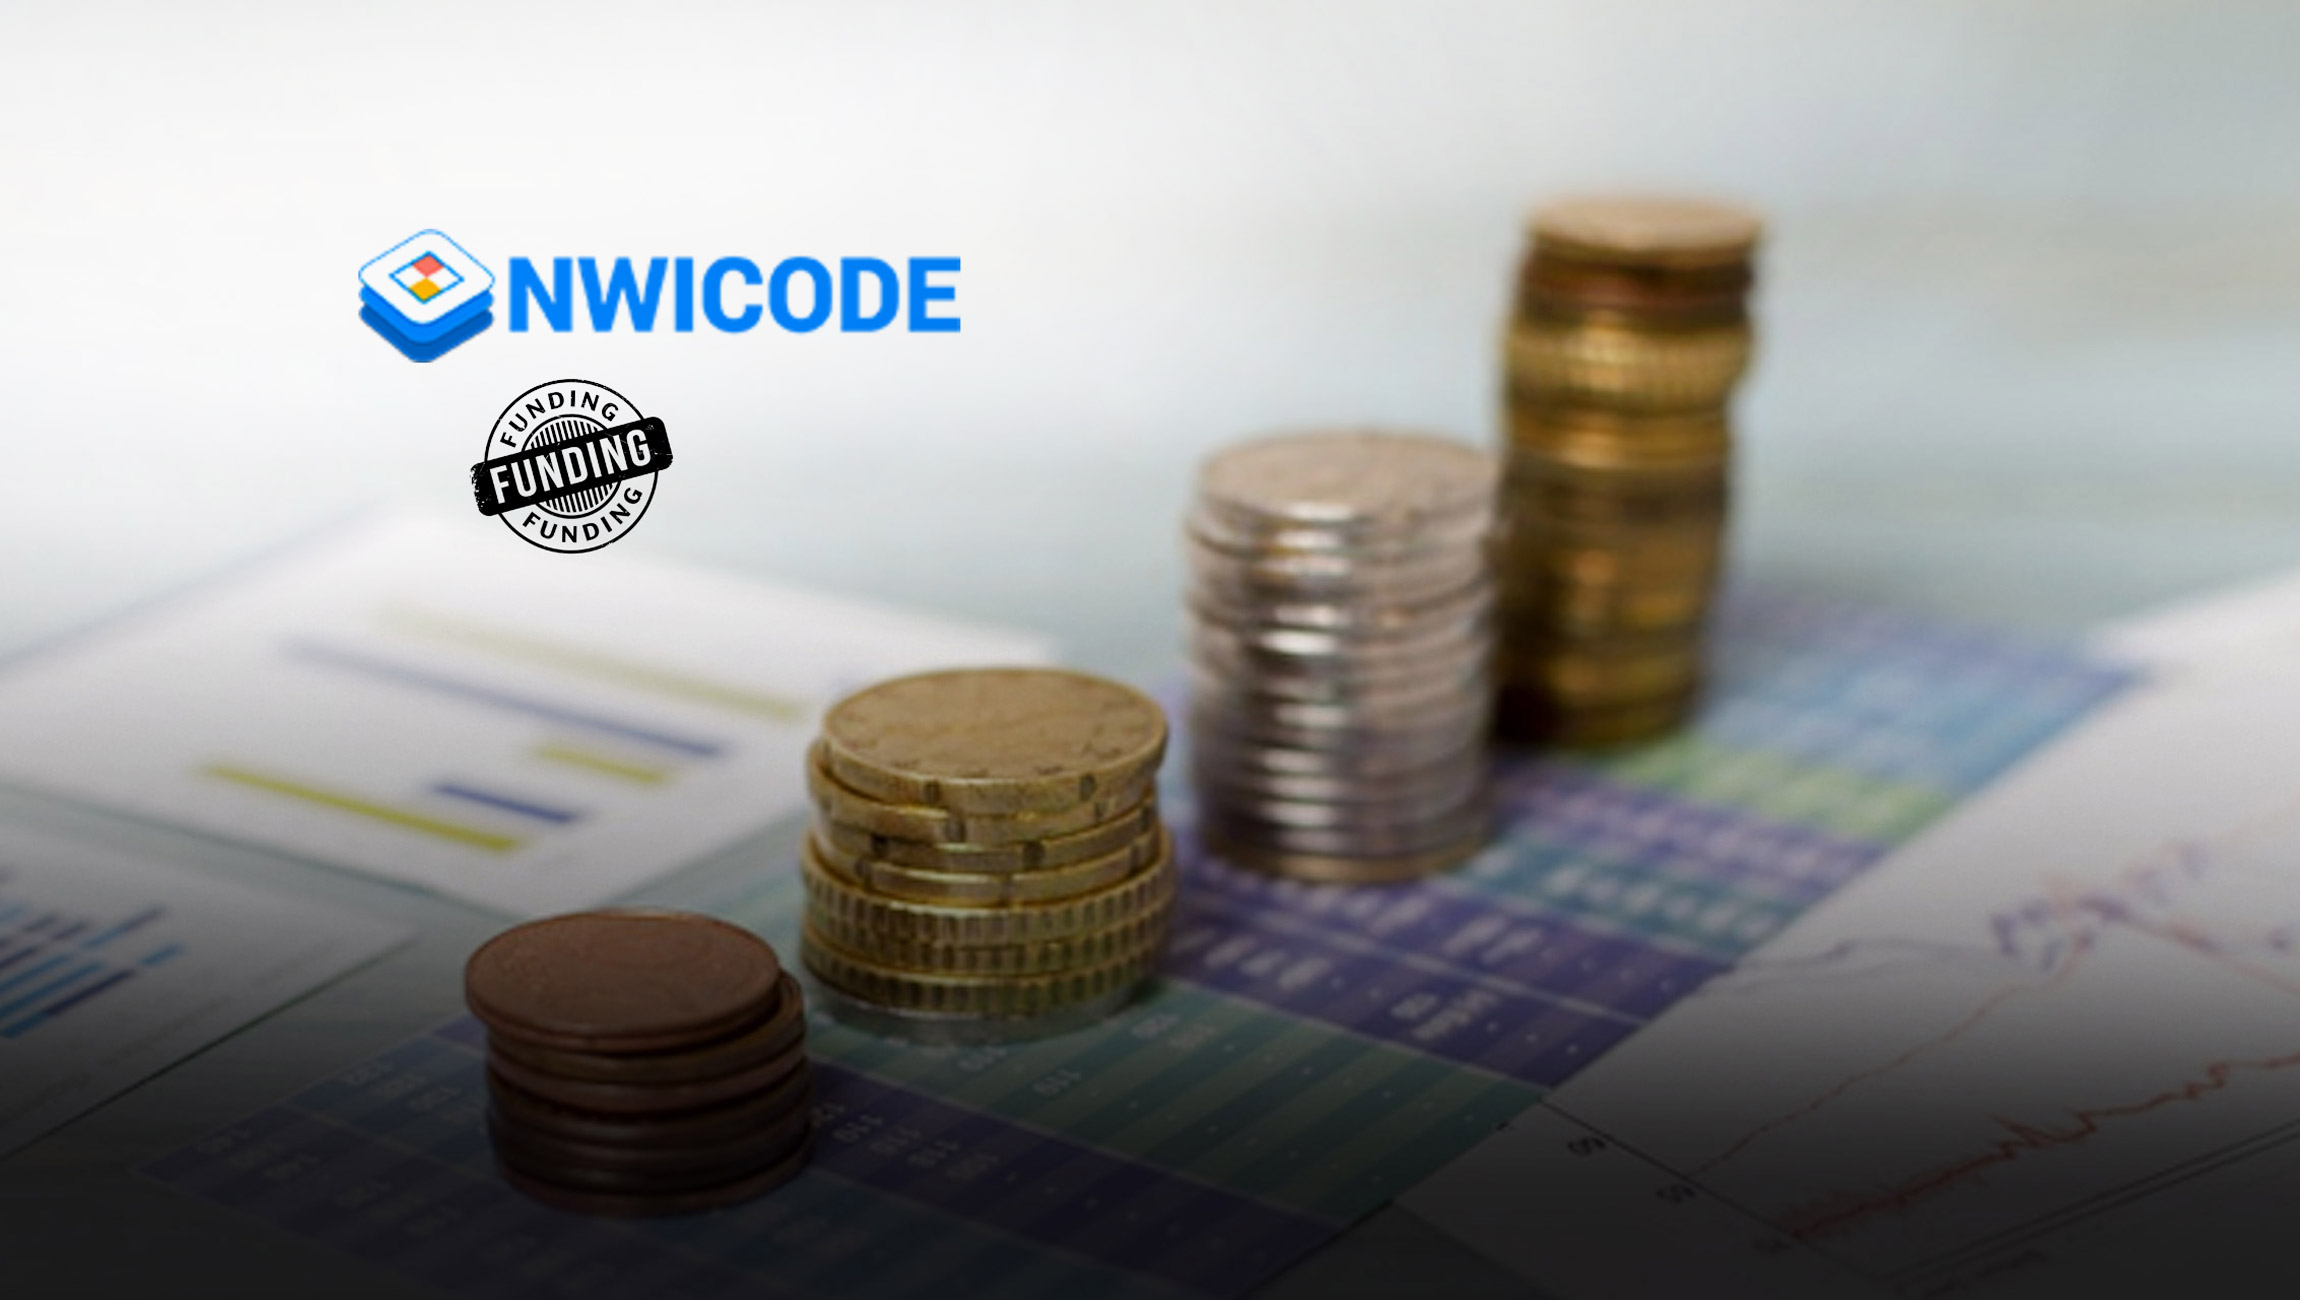 Nwicode Raises $1 million Seed Round With Wefunder By allowing All Existing Customers To Own Part Of Nwicode Inc